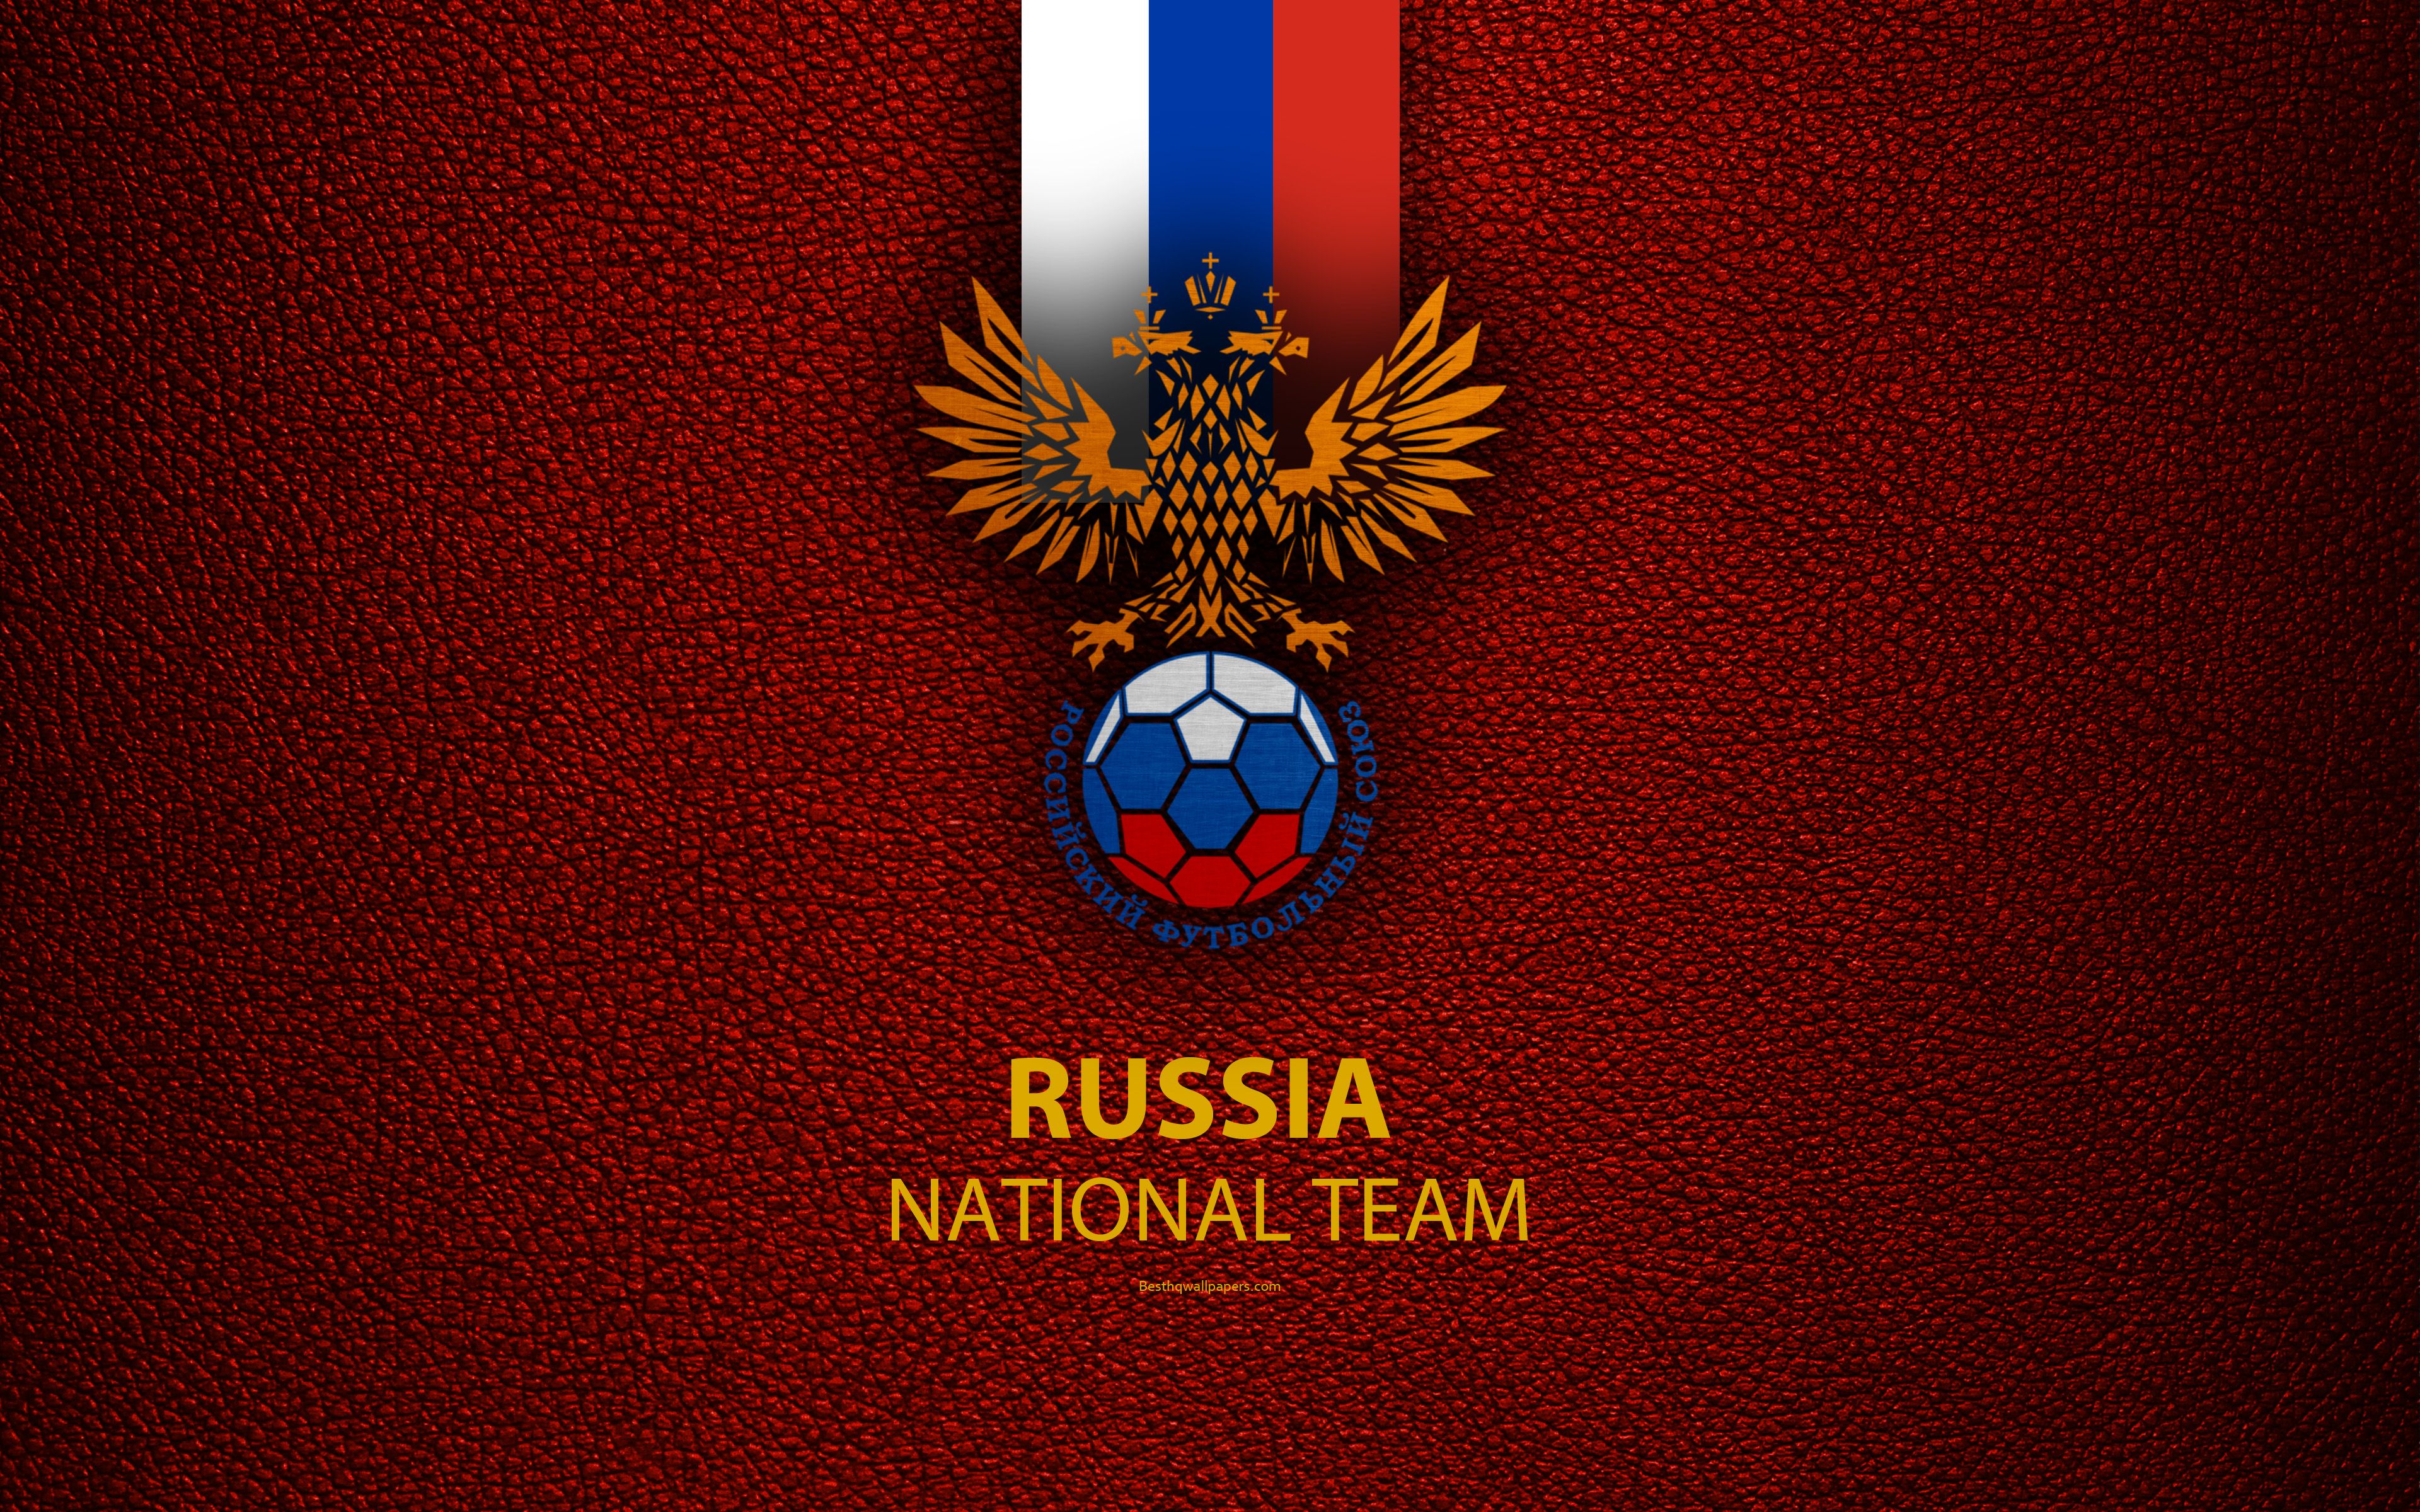 Download wallpaper Russian national football team, 4k, leather